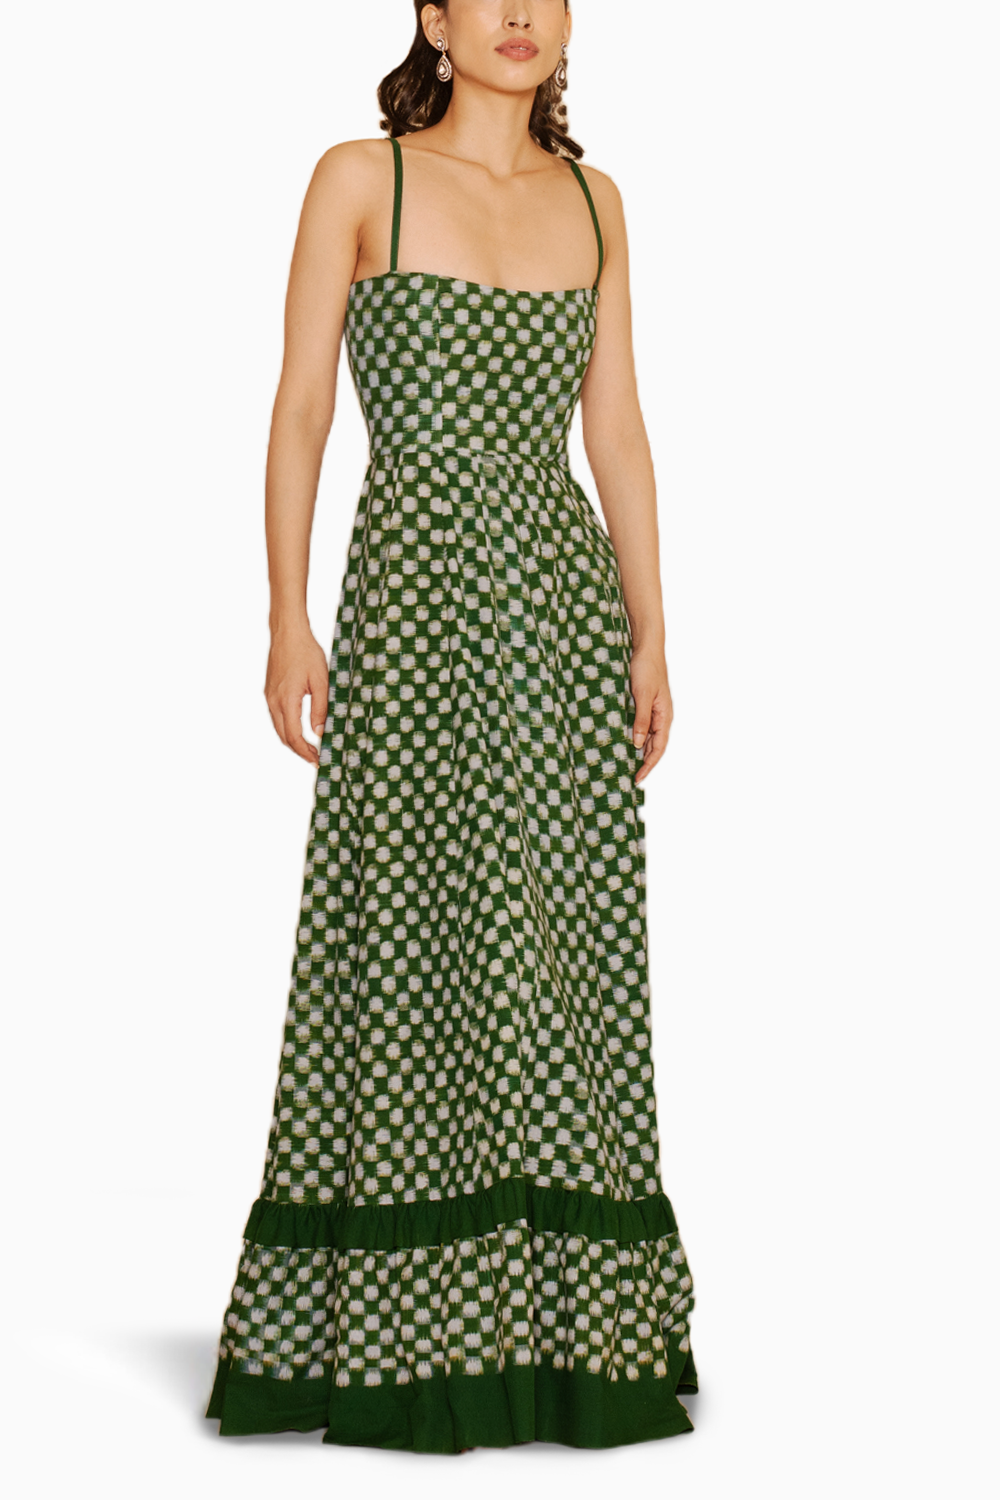 Green Checkmate Dress